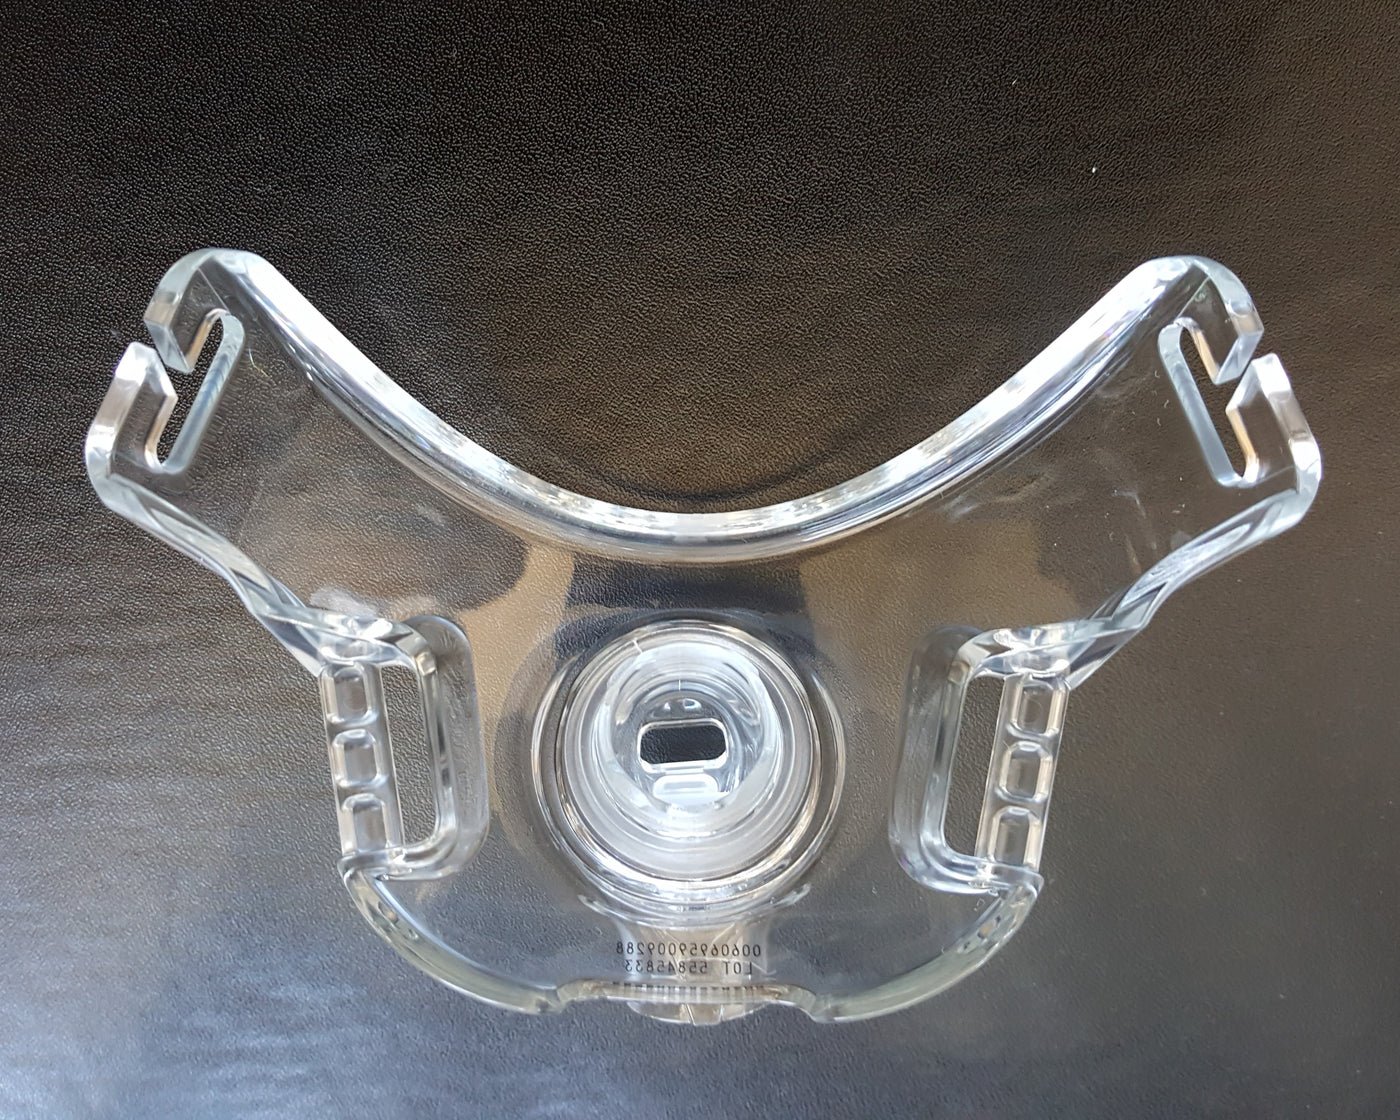 New Philips Respironics AmaraView CPAP mask parts all size Cush Frame Tube Strap